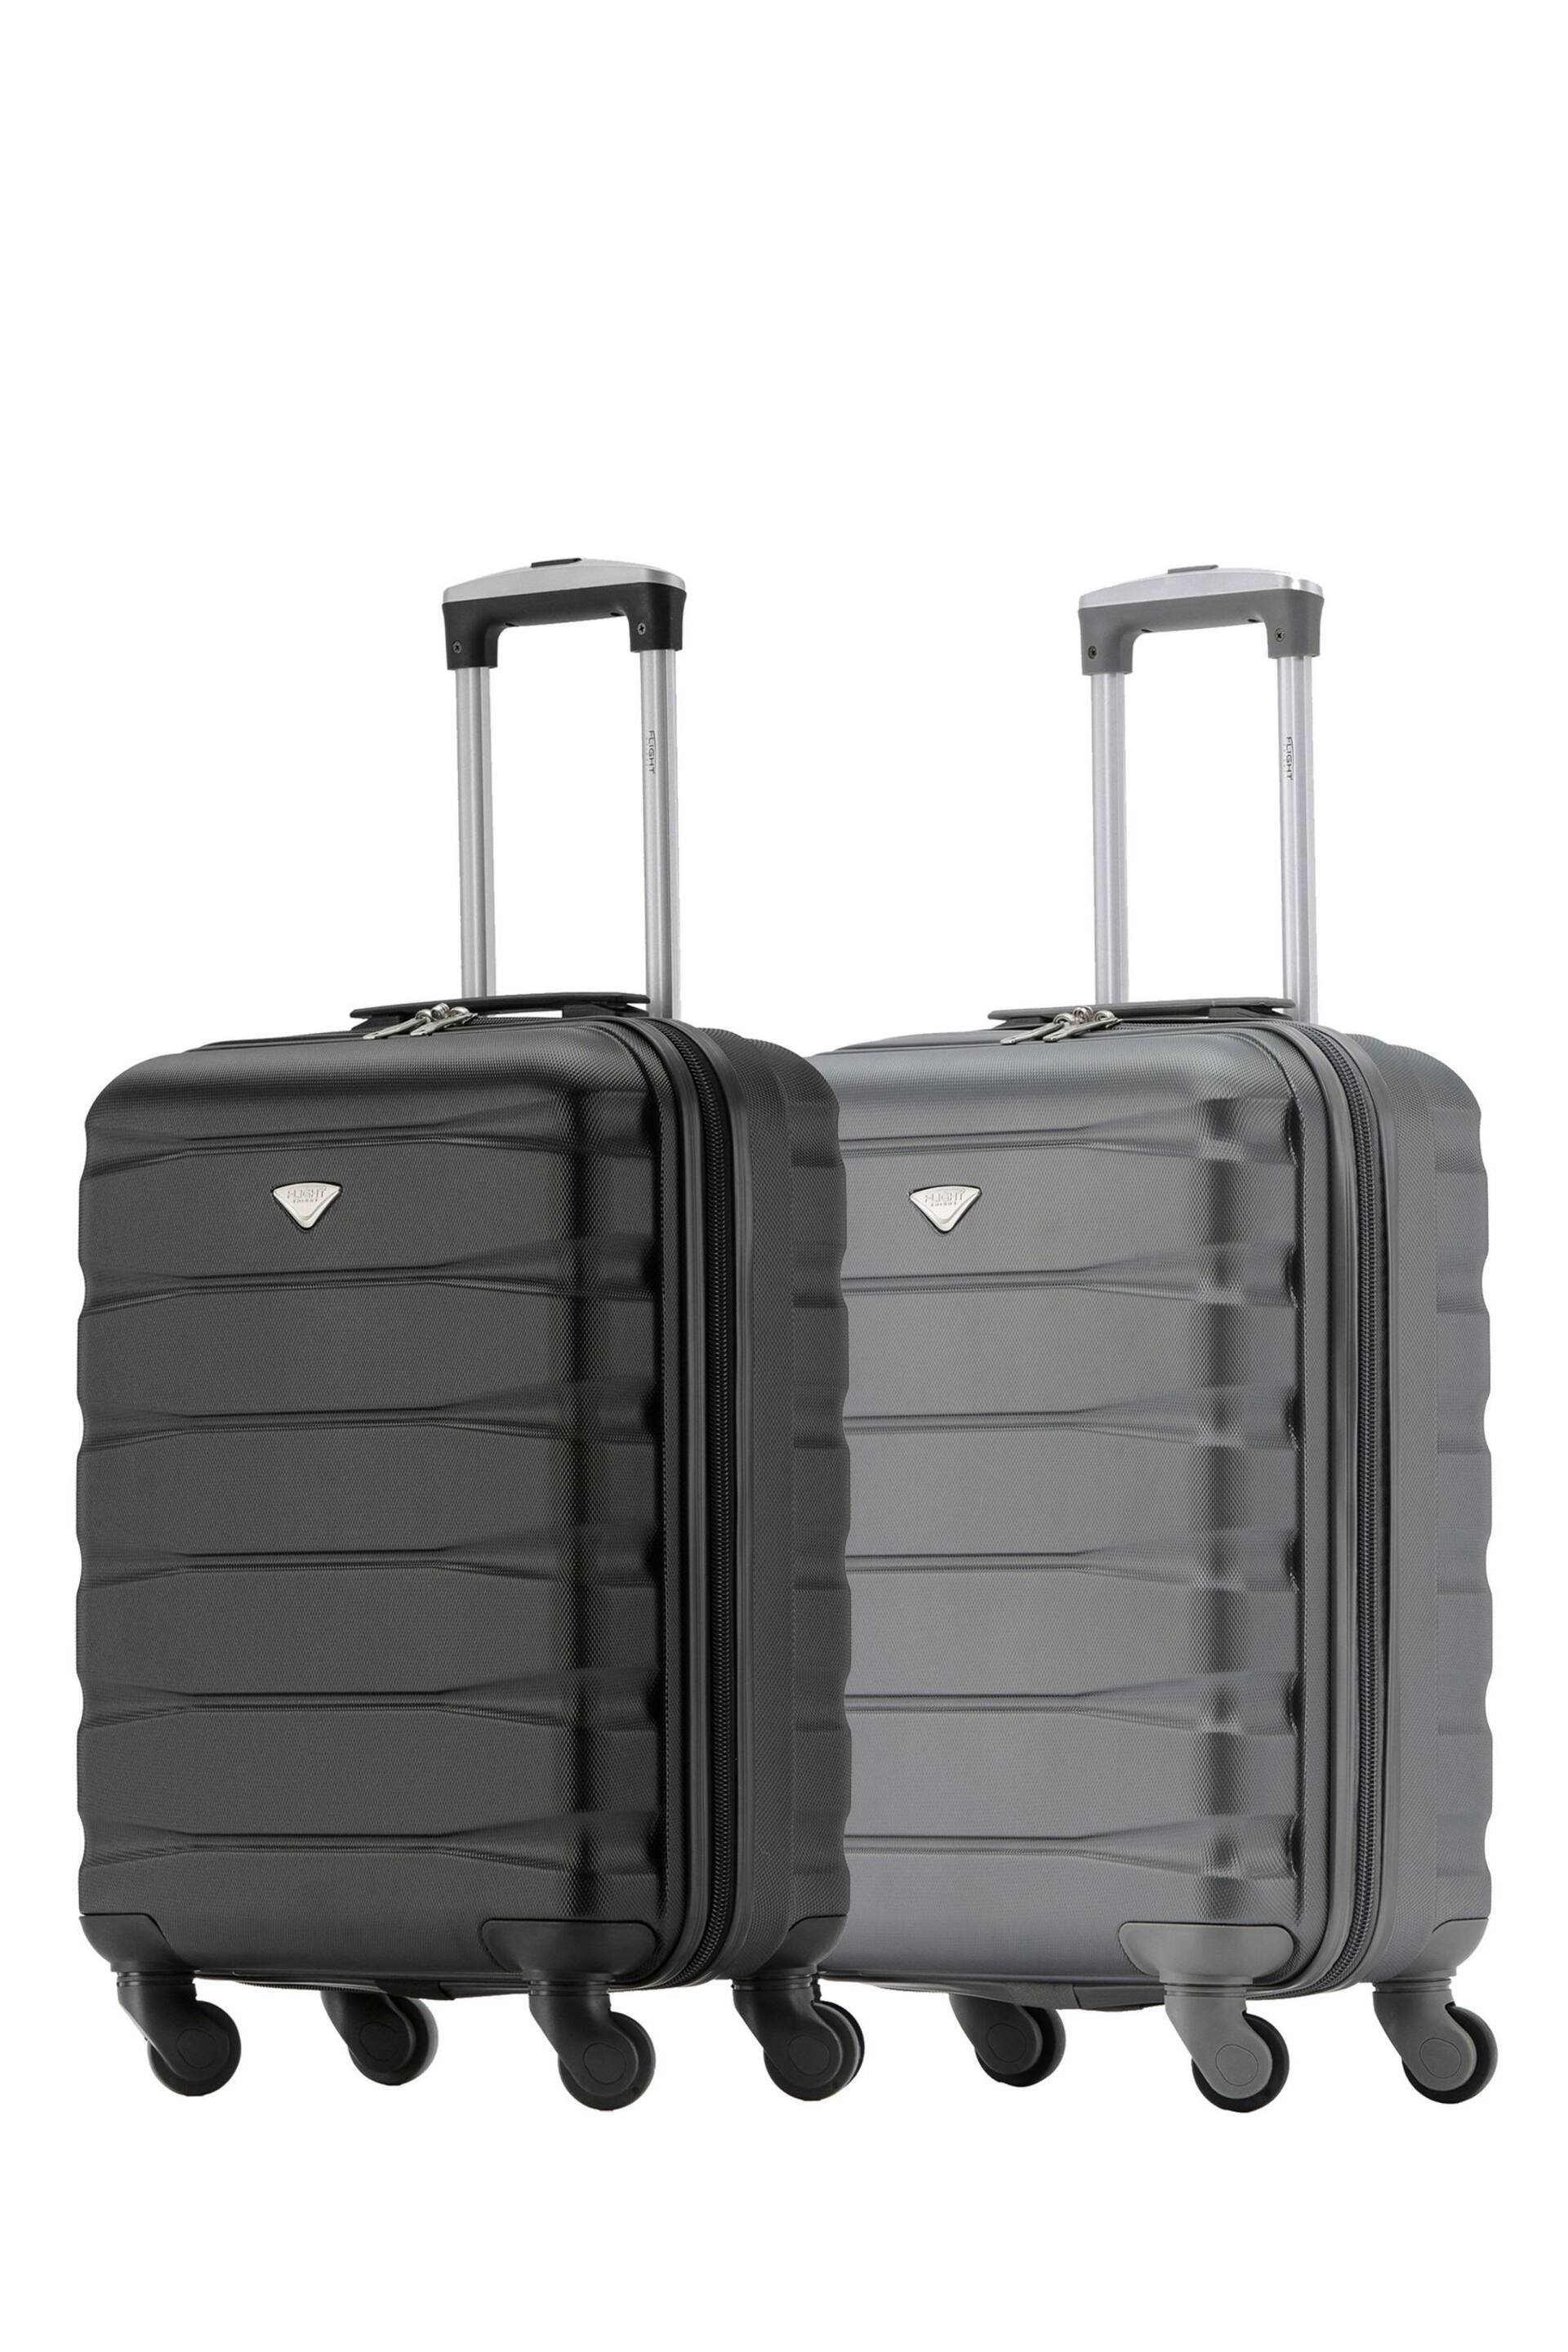 Flight Knight Ryanair Priority 4 Wheel ABS Hard Case Cabin Carry On Suitcase 55x40x20cm  Set Of 2 - Image 1 of 8